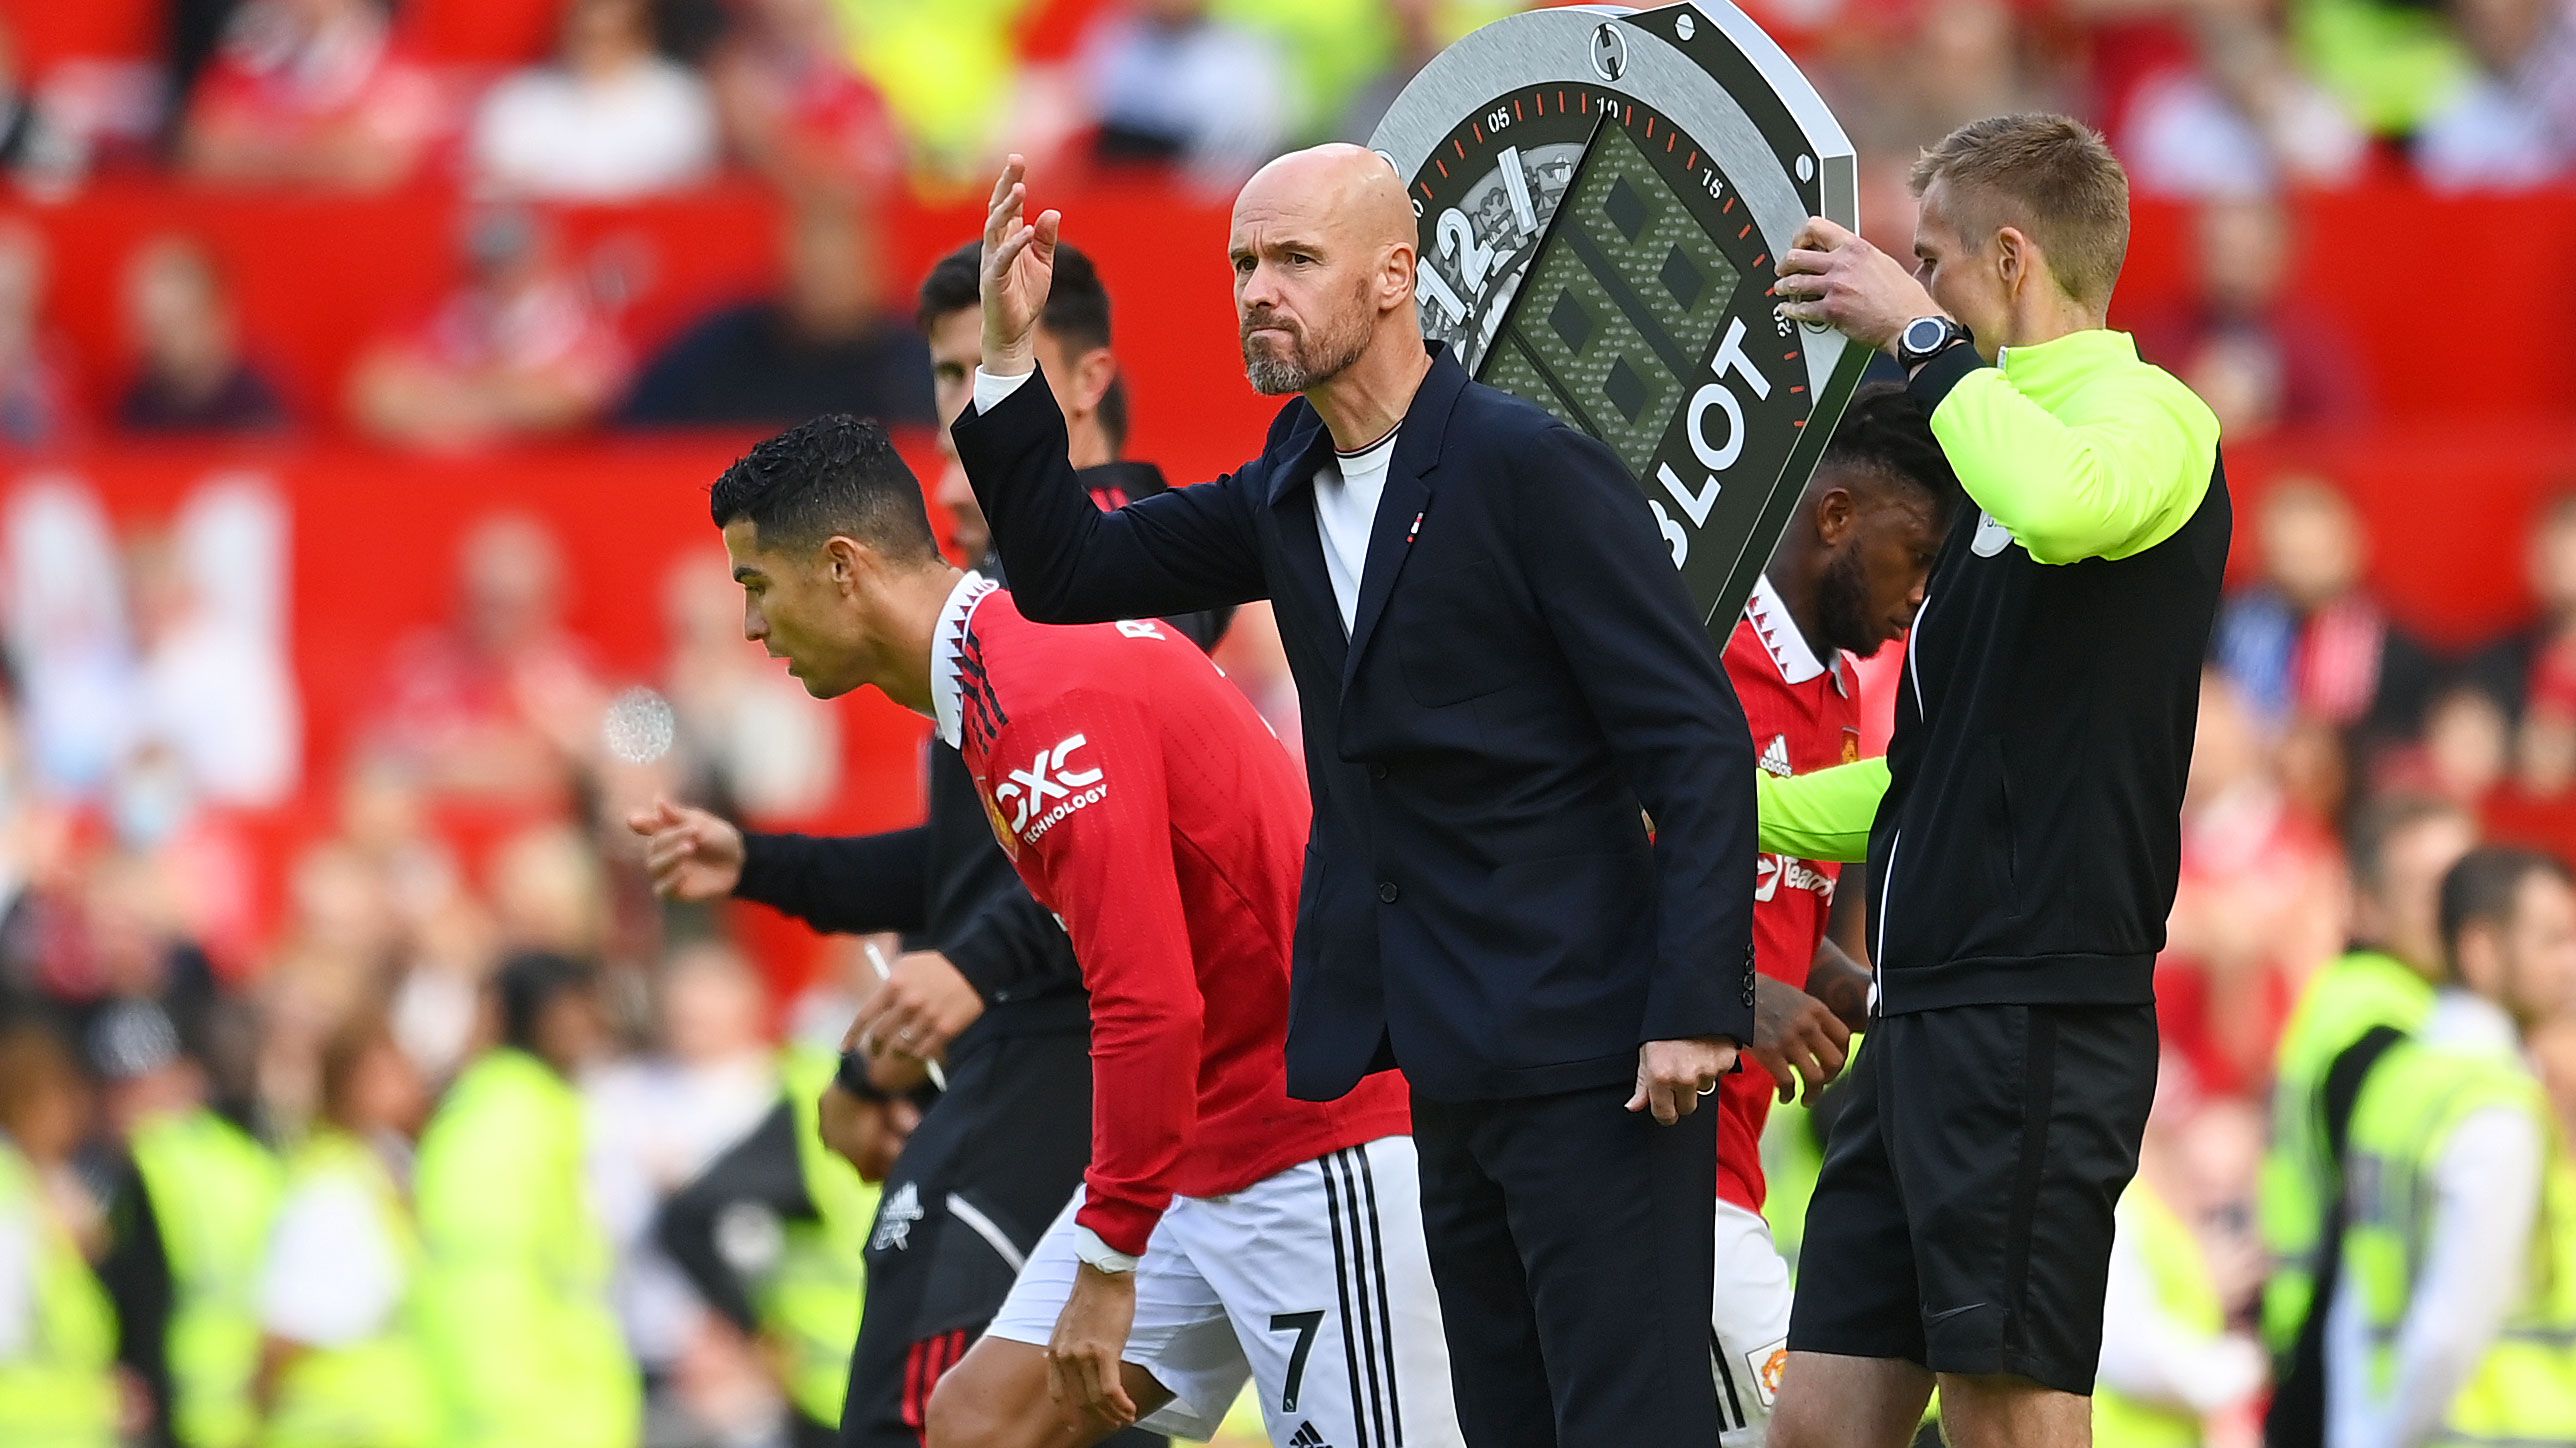 Erik ten Haag, manager of Manchester United reacts as Cristiano Ronaldo of Manchester United is substituted on for Fred. 